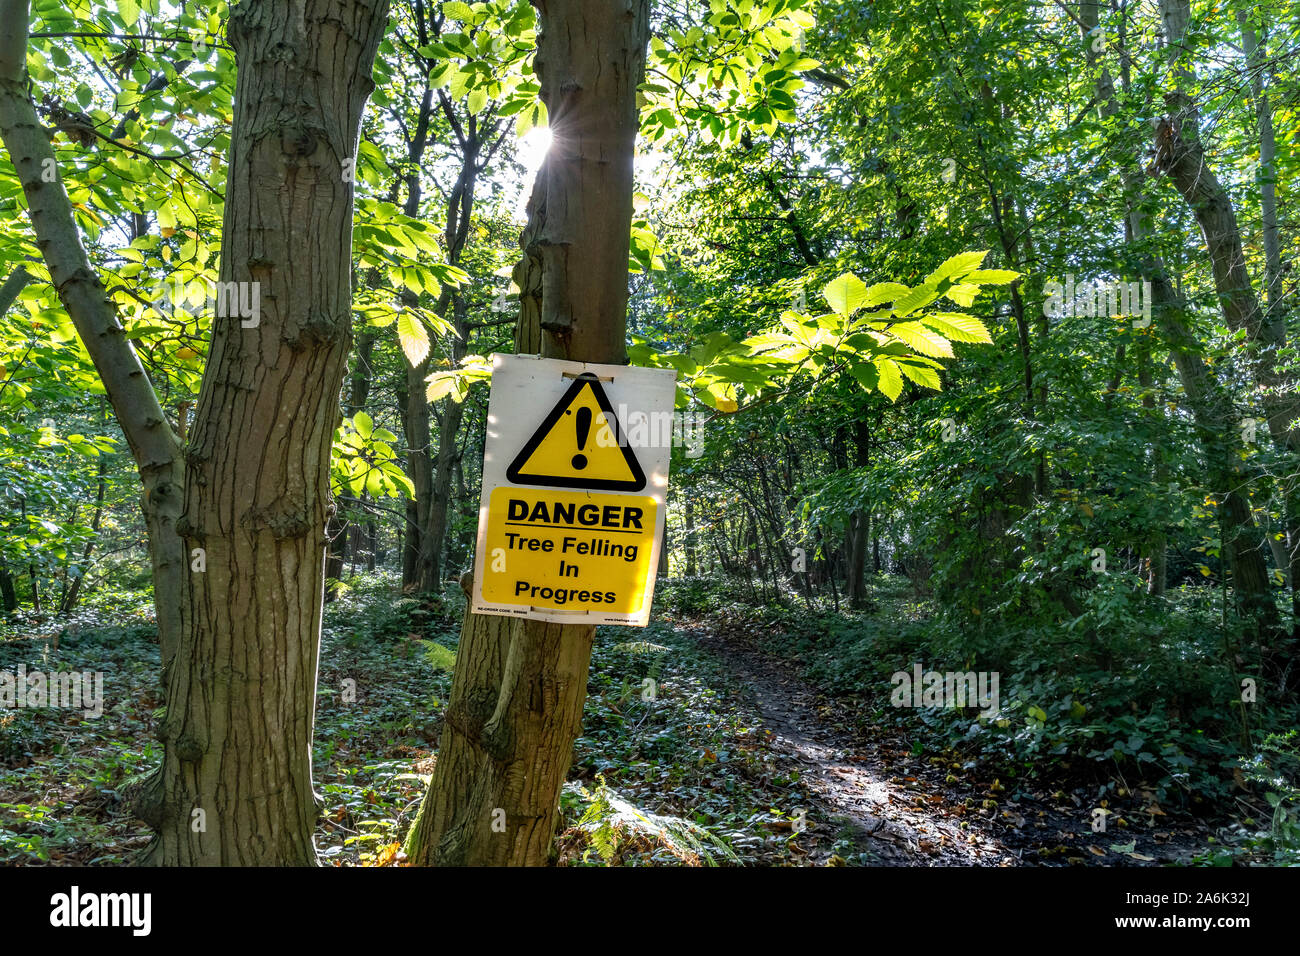 TREE FELLING WARNING SIGN IN WOODS Stock Photo